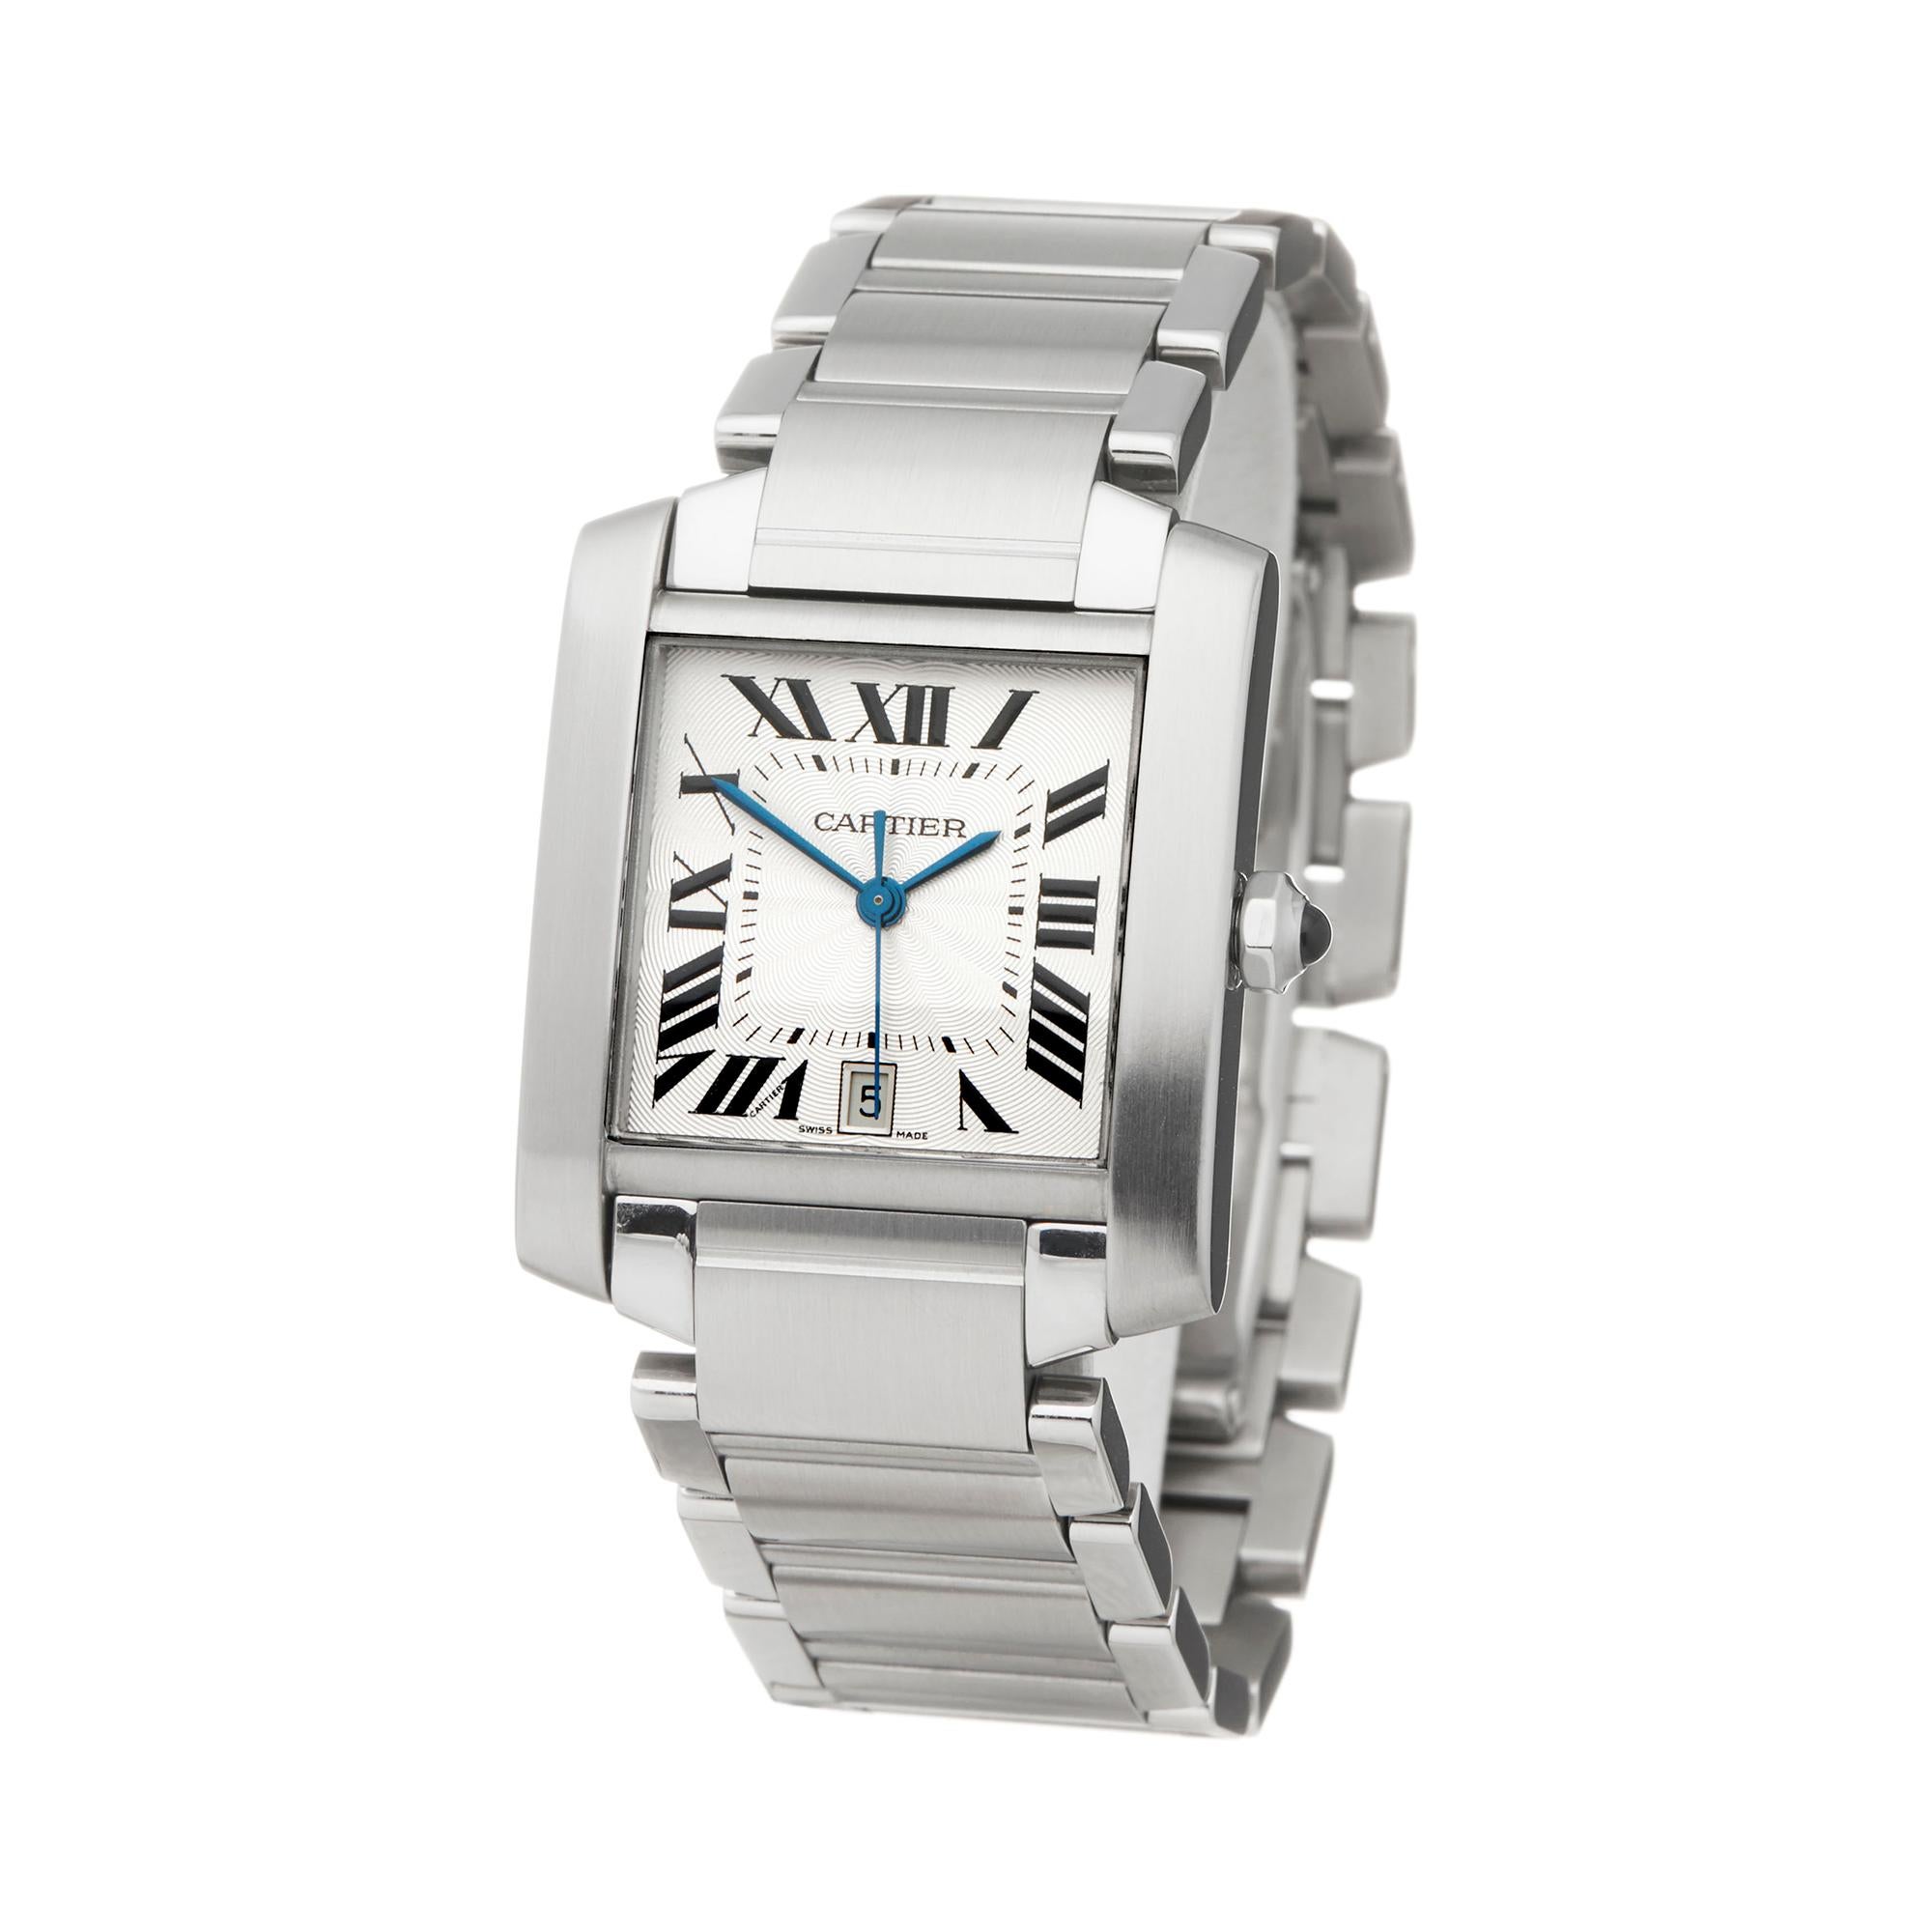 Reference: COM2110
Manufacturer: Cartier
Model: Tank Francaise
Model Reference: 2302
Age: Circa 2000's
Gender: Men's
Box and Papers: Presentation Box
Dial: Silver Roman
Glass: Sapphire Crystal
Movement: Automatic
Water Resistance: To Manufacturers